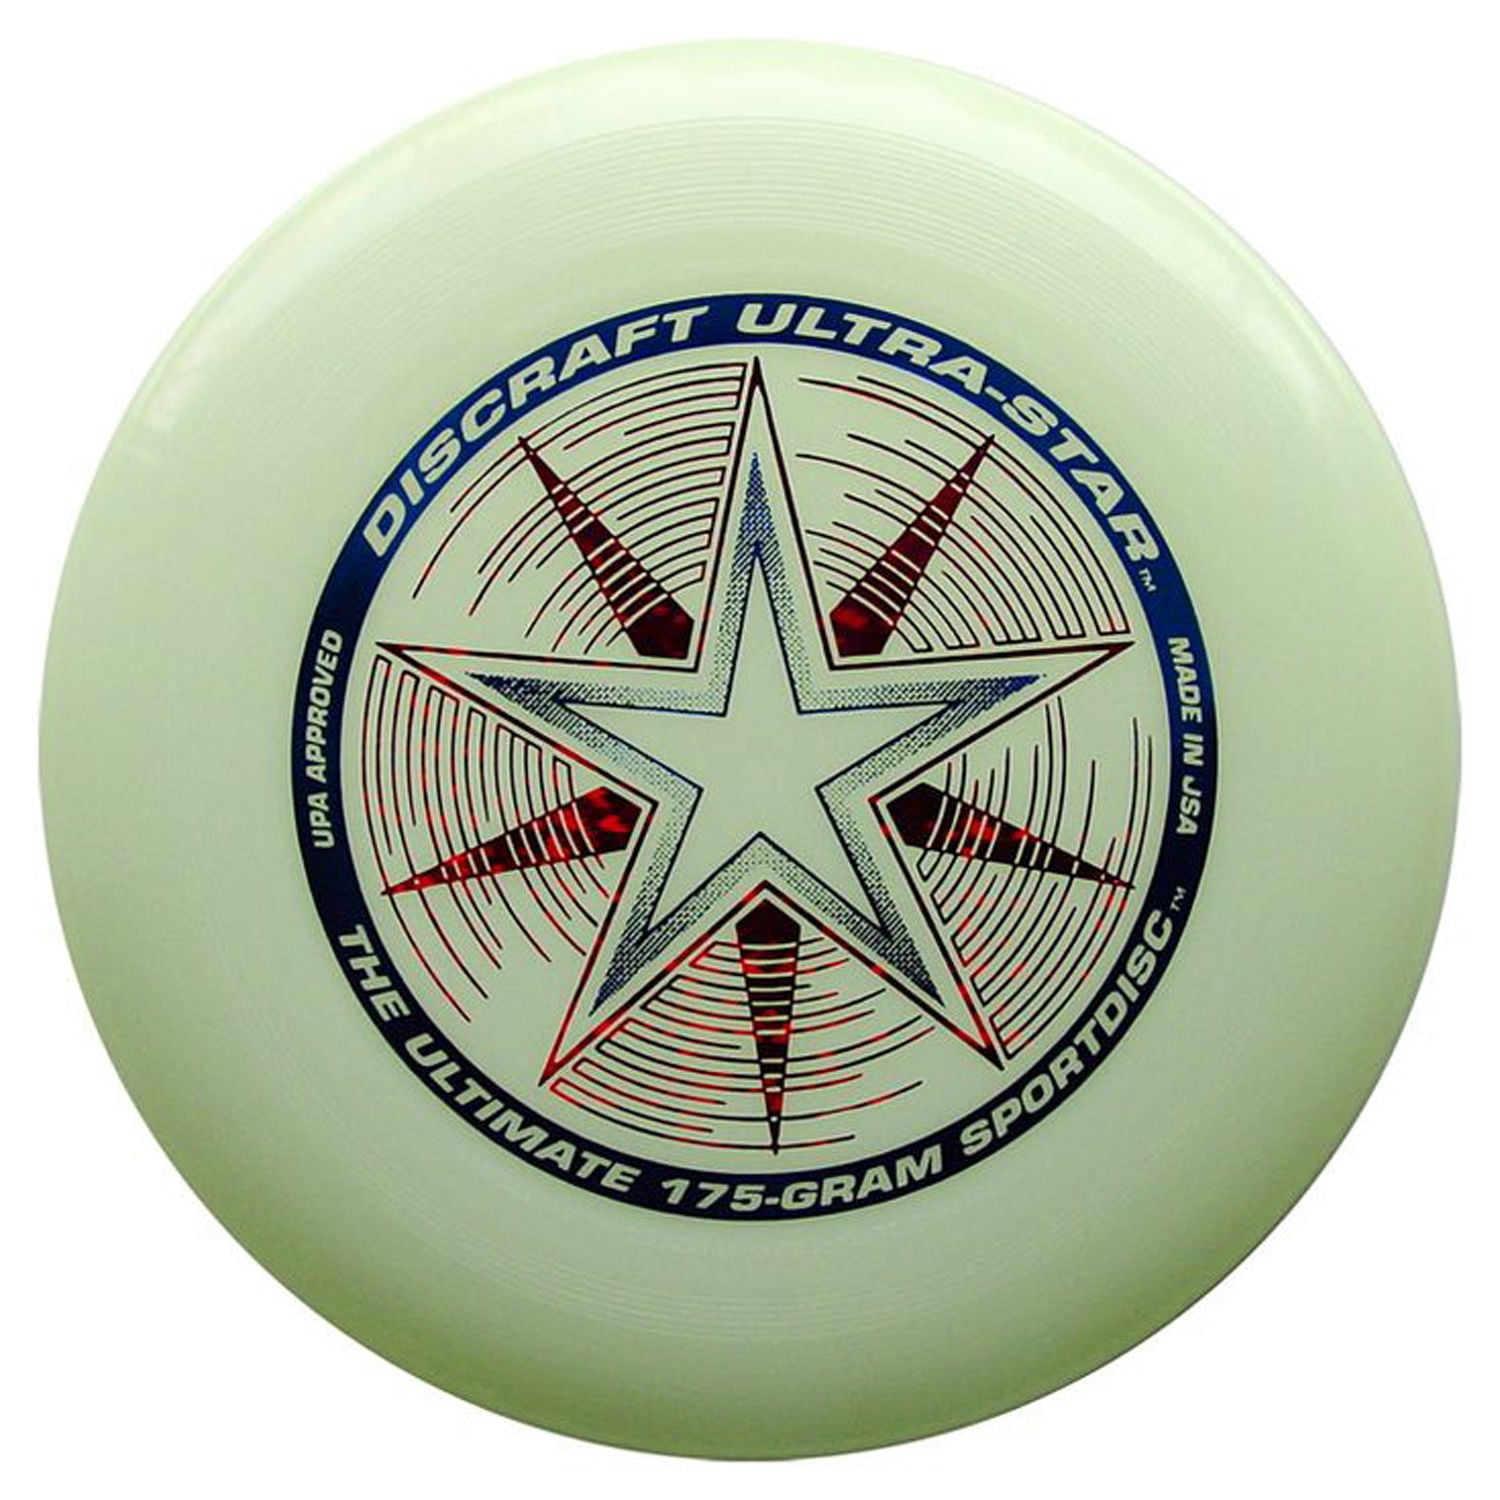 BLUE/YELLOW NEW Discraft ULTRA-STAR 175g Ultimate Frisbee Disc 2 Pack 